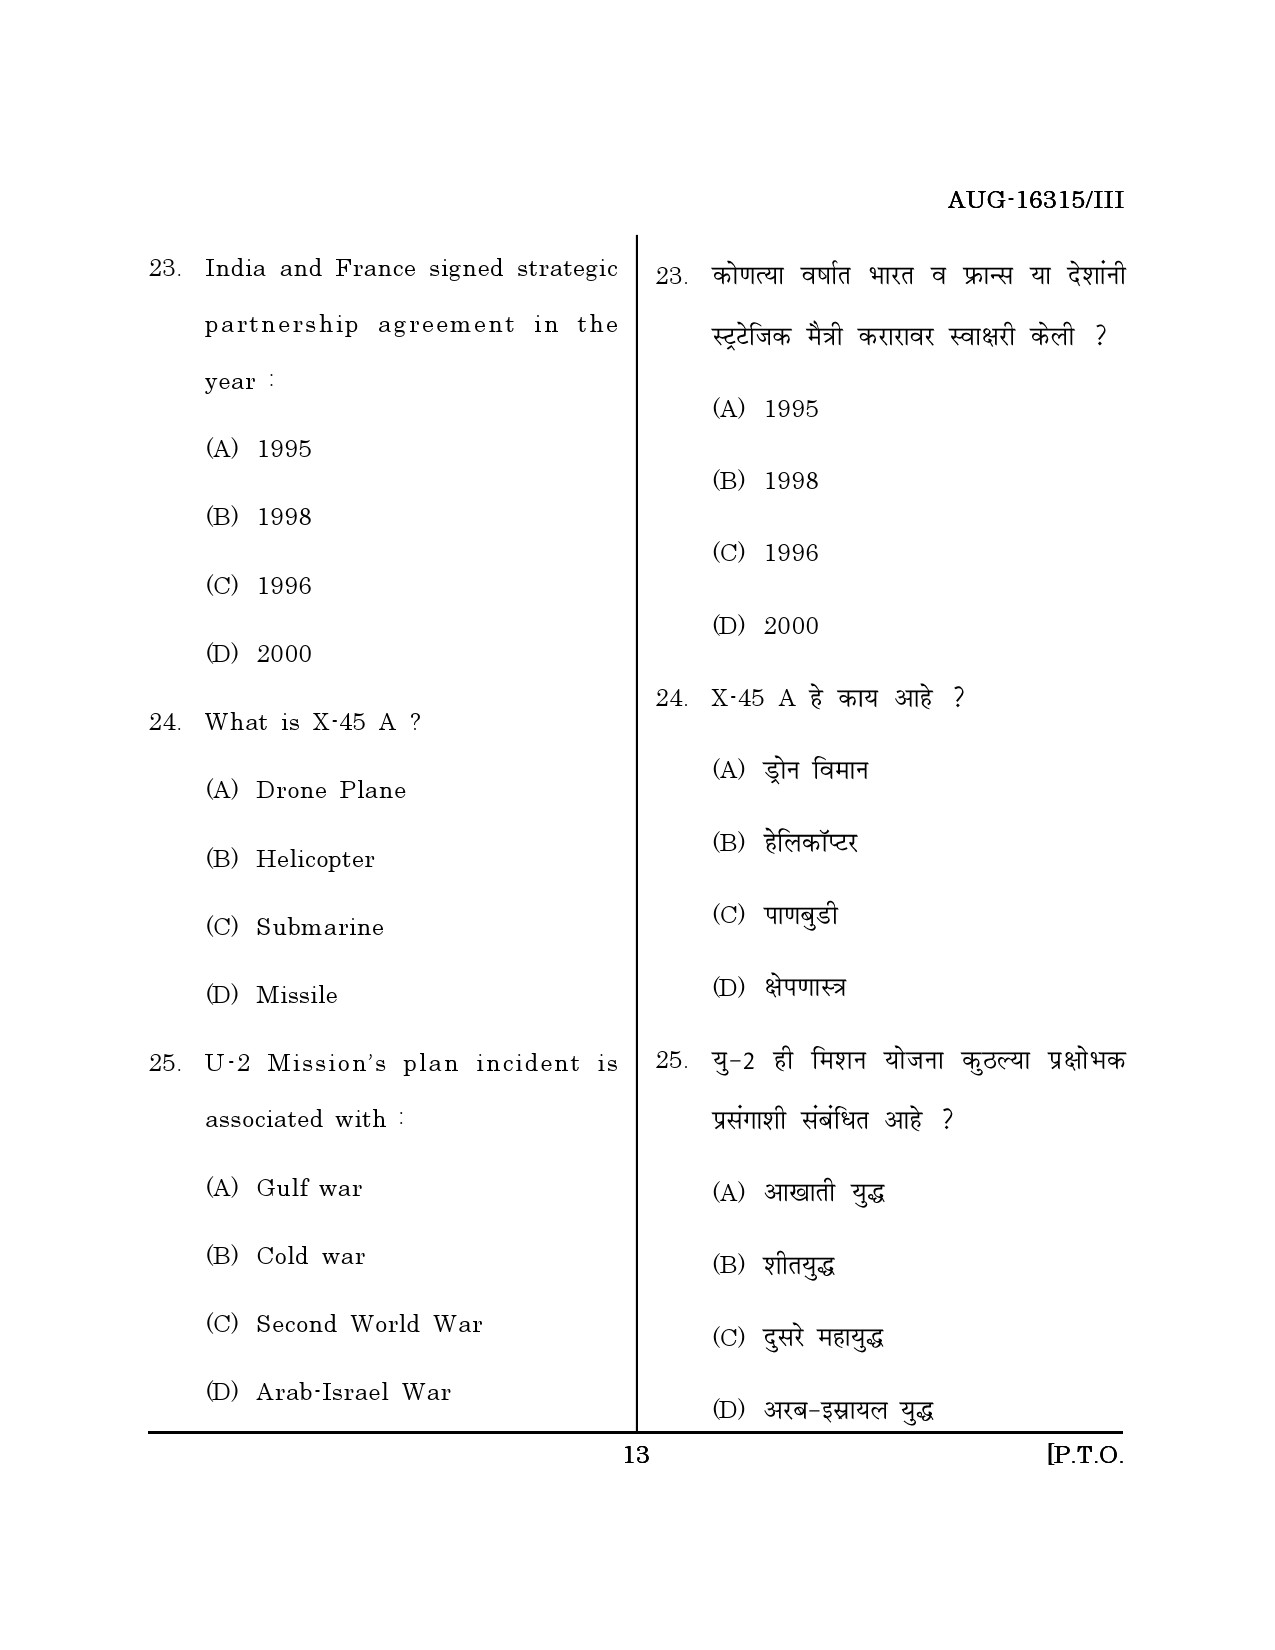 Maharashtra SET Defence and Strategic Studies Question Paper III August 2015 12